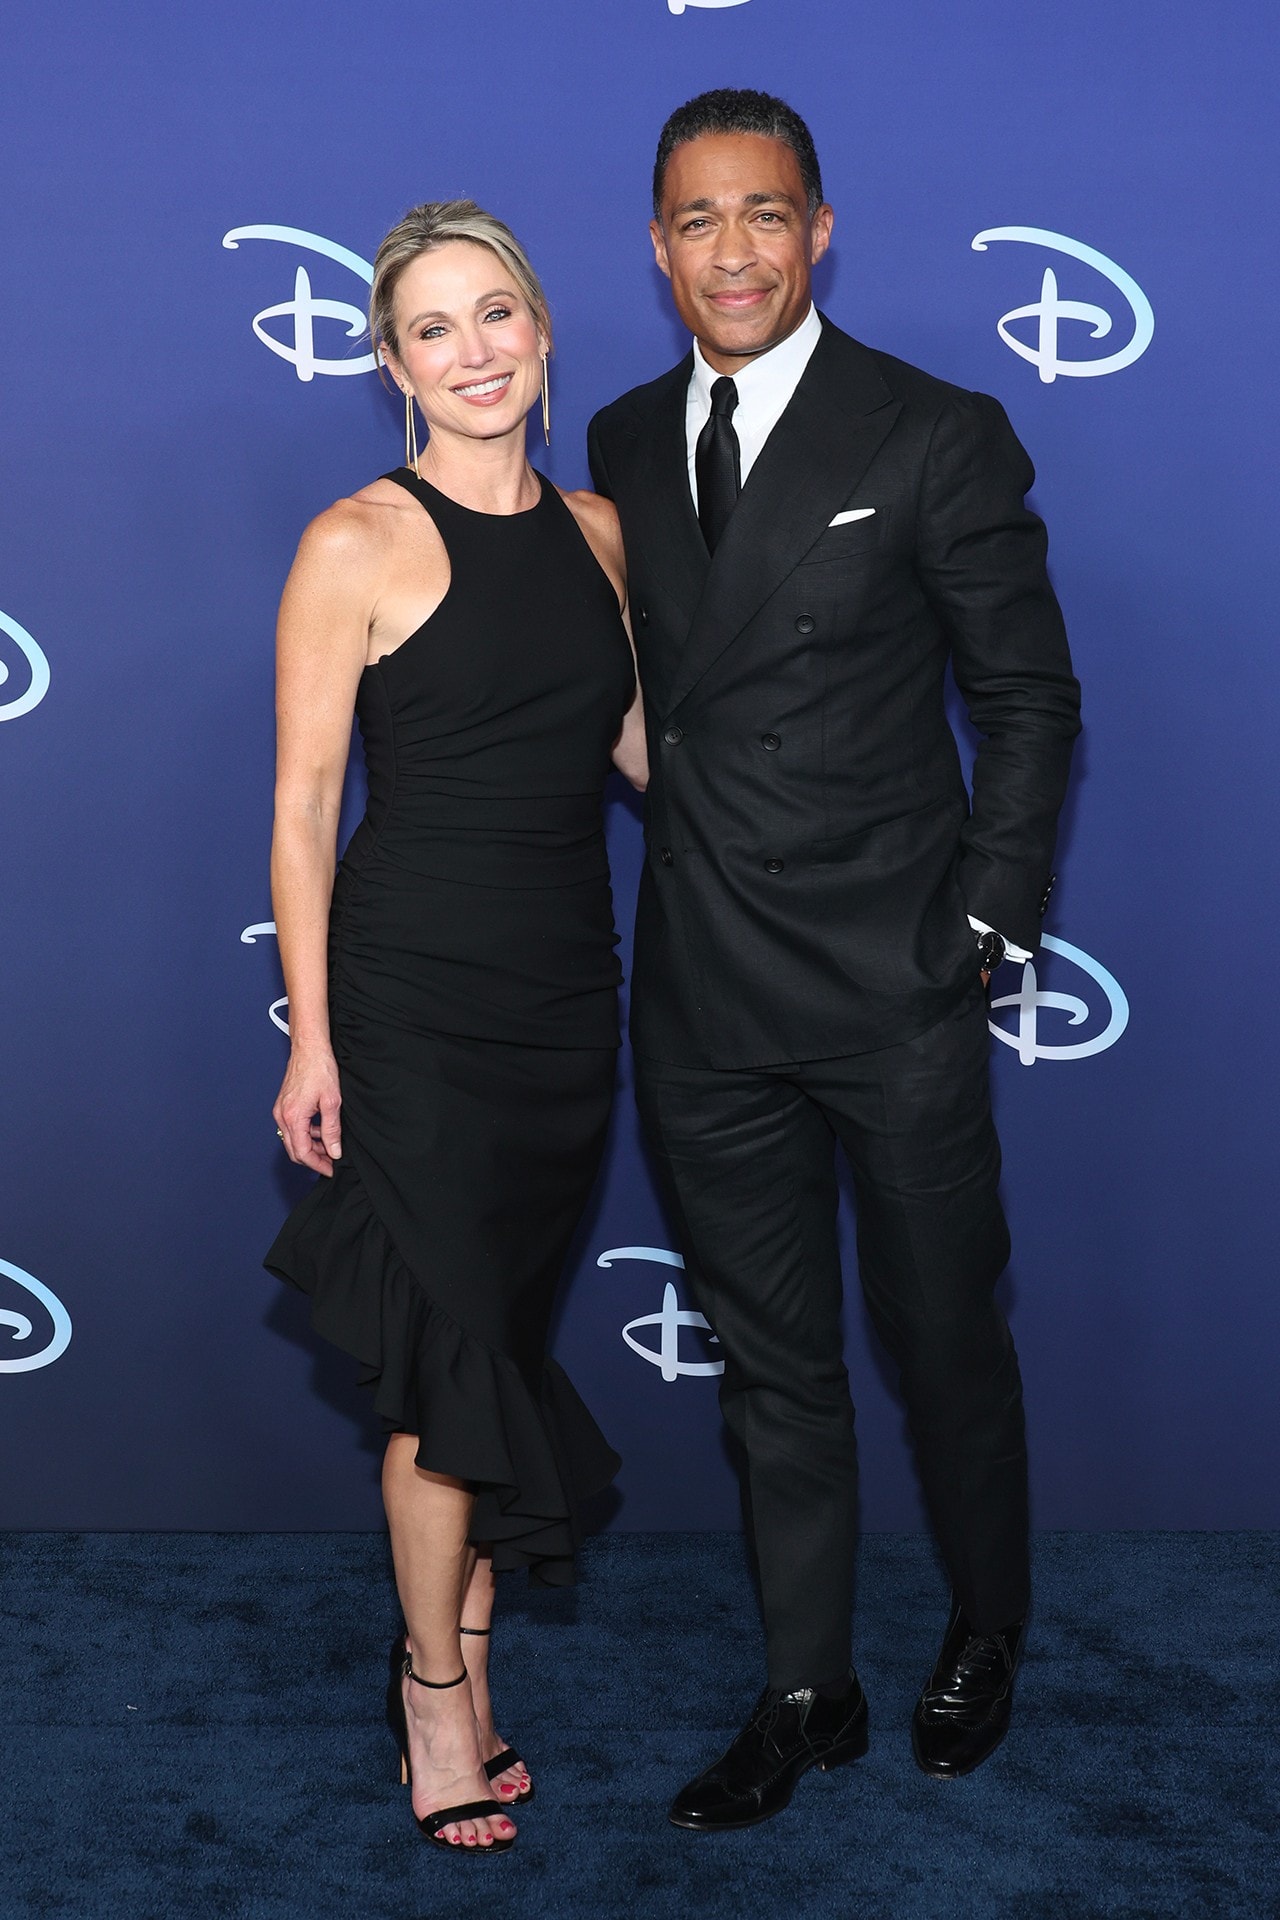 Amy Robach and T.J. Holmes on the red carpet